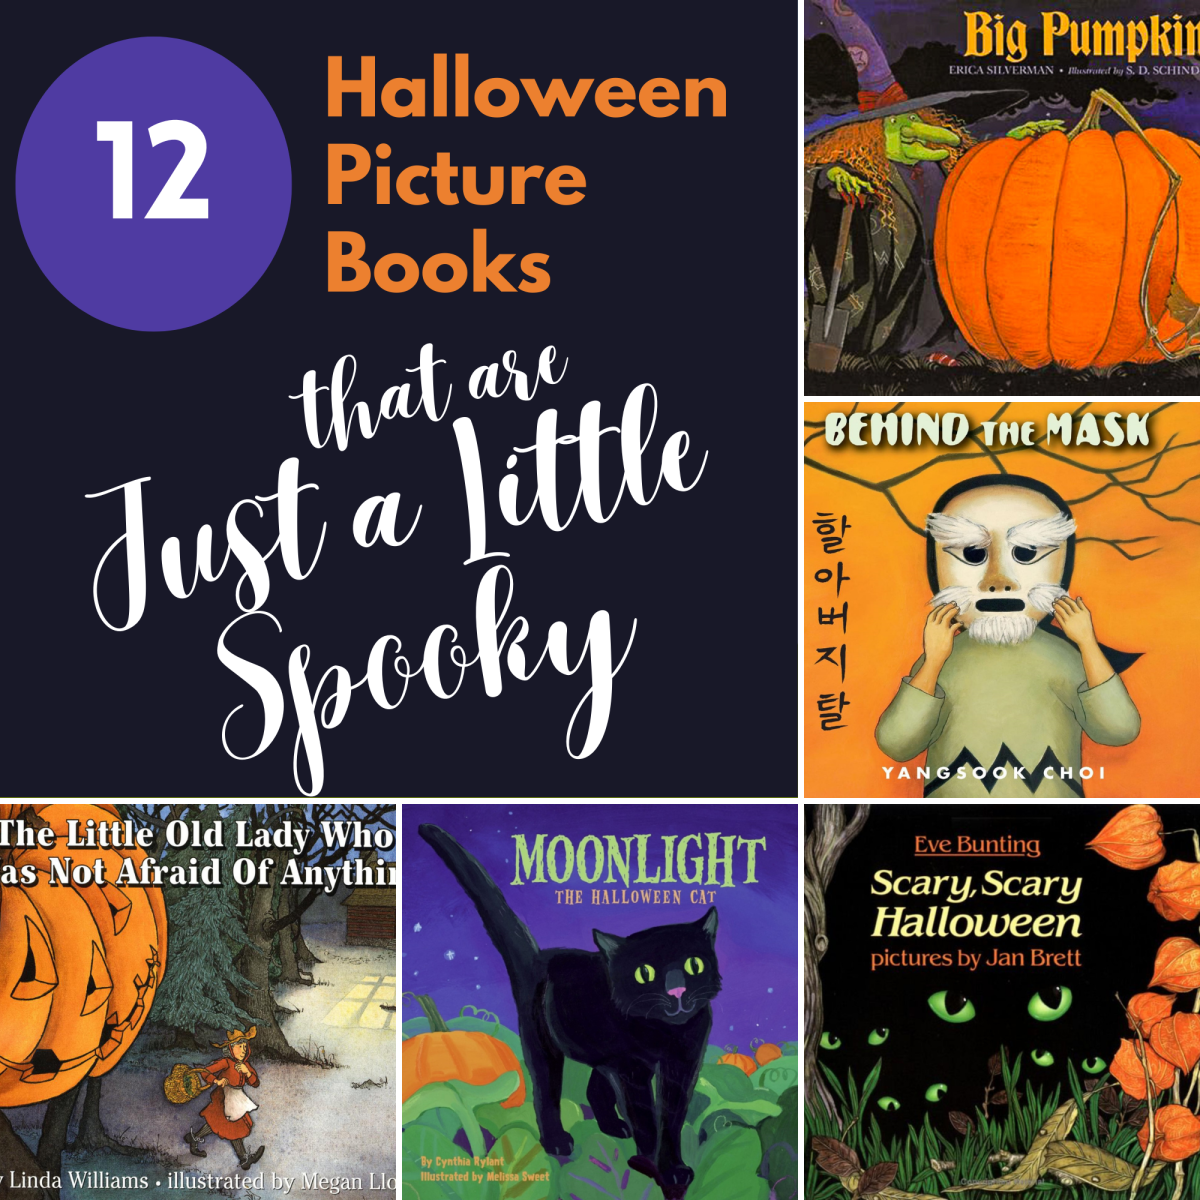 12 Halloween Picture Books that are Just A Little Spooky